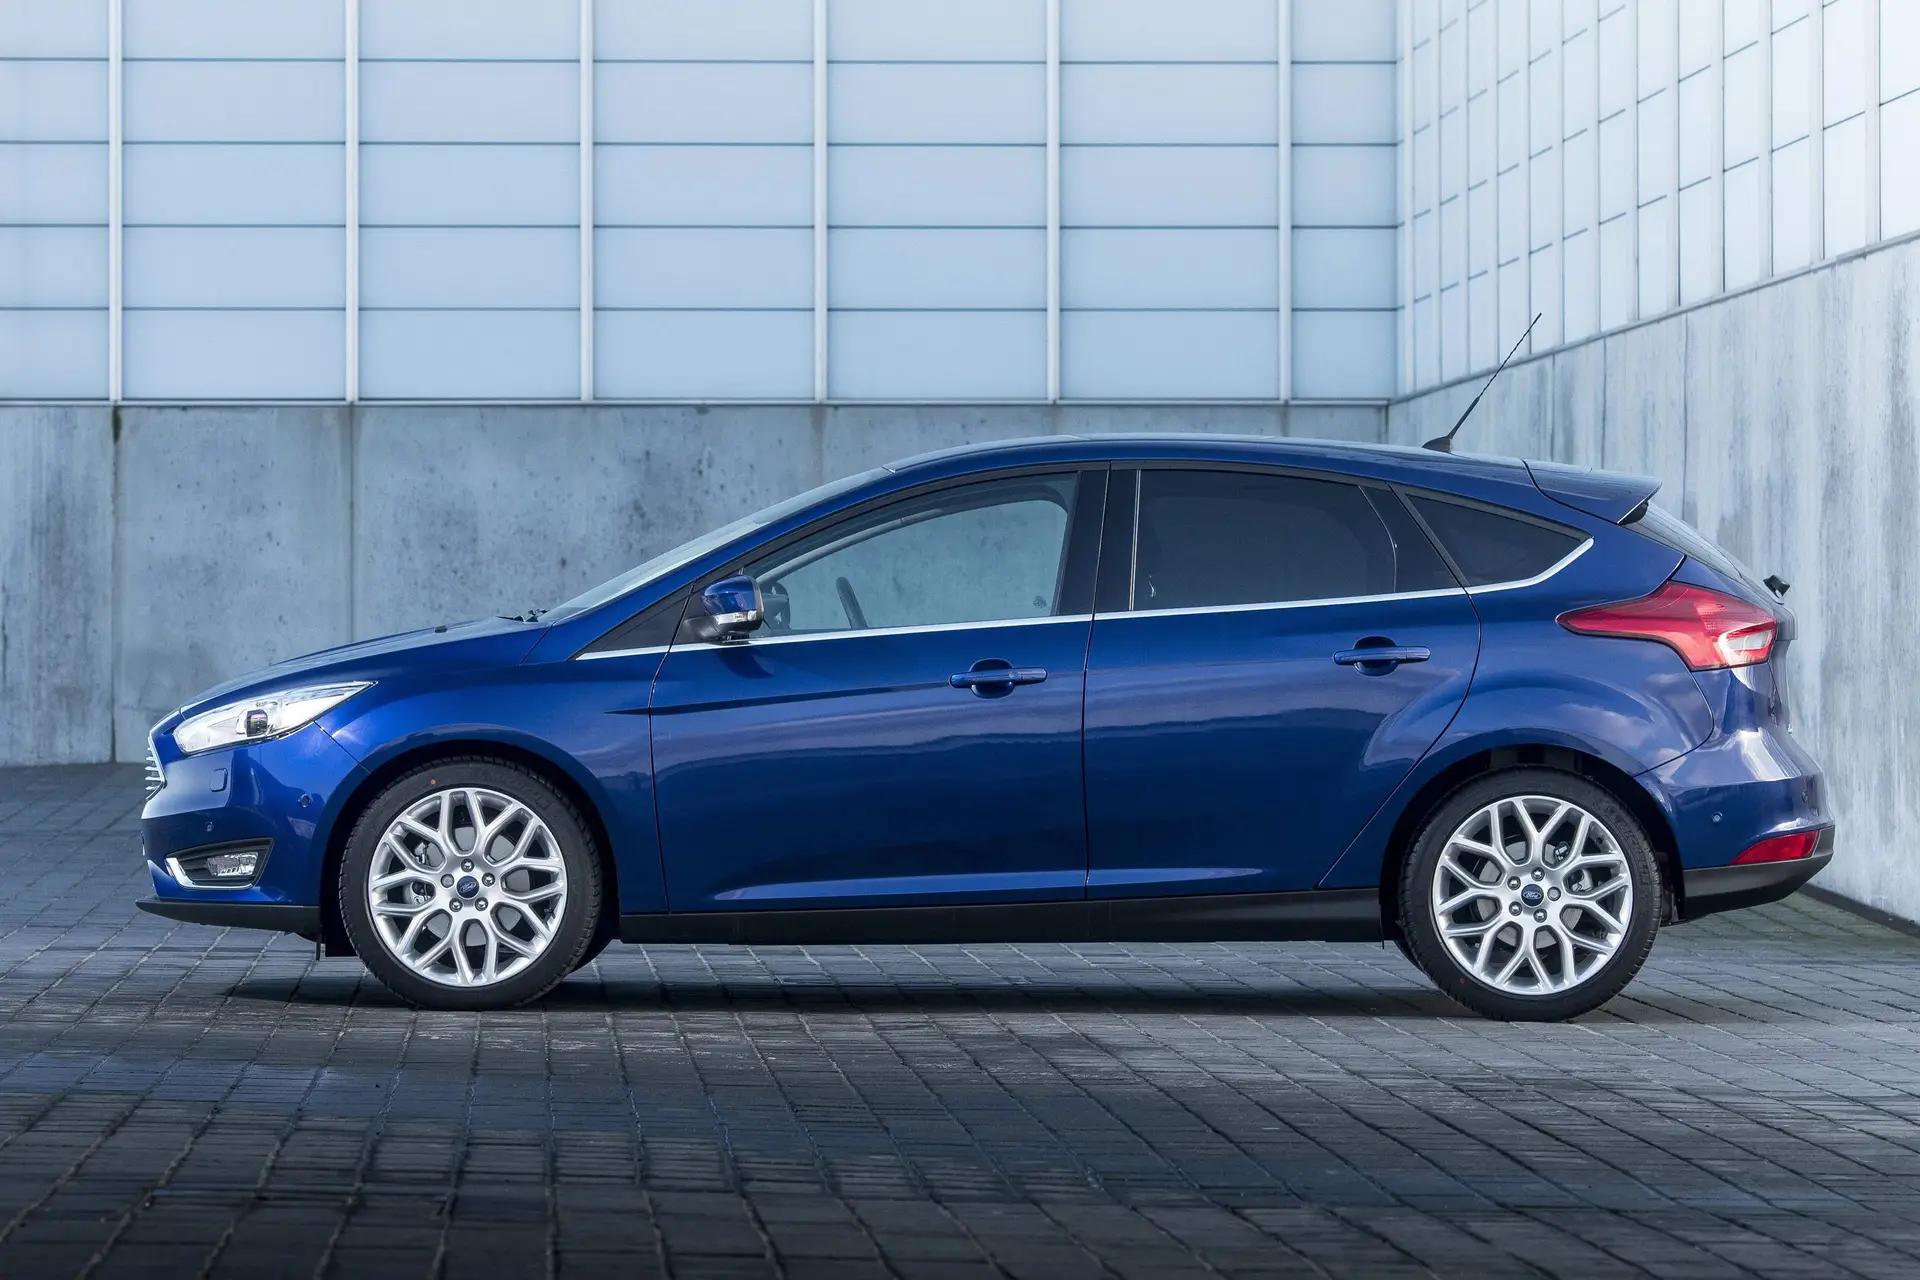 Ford Focus (2014-2018) Review: exterior side photo of the Ford Focus